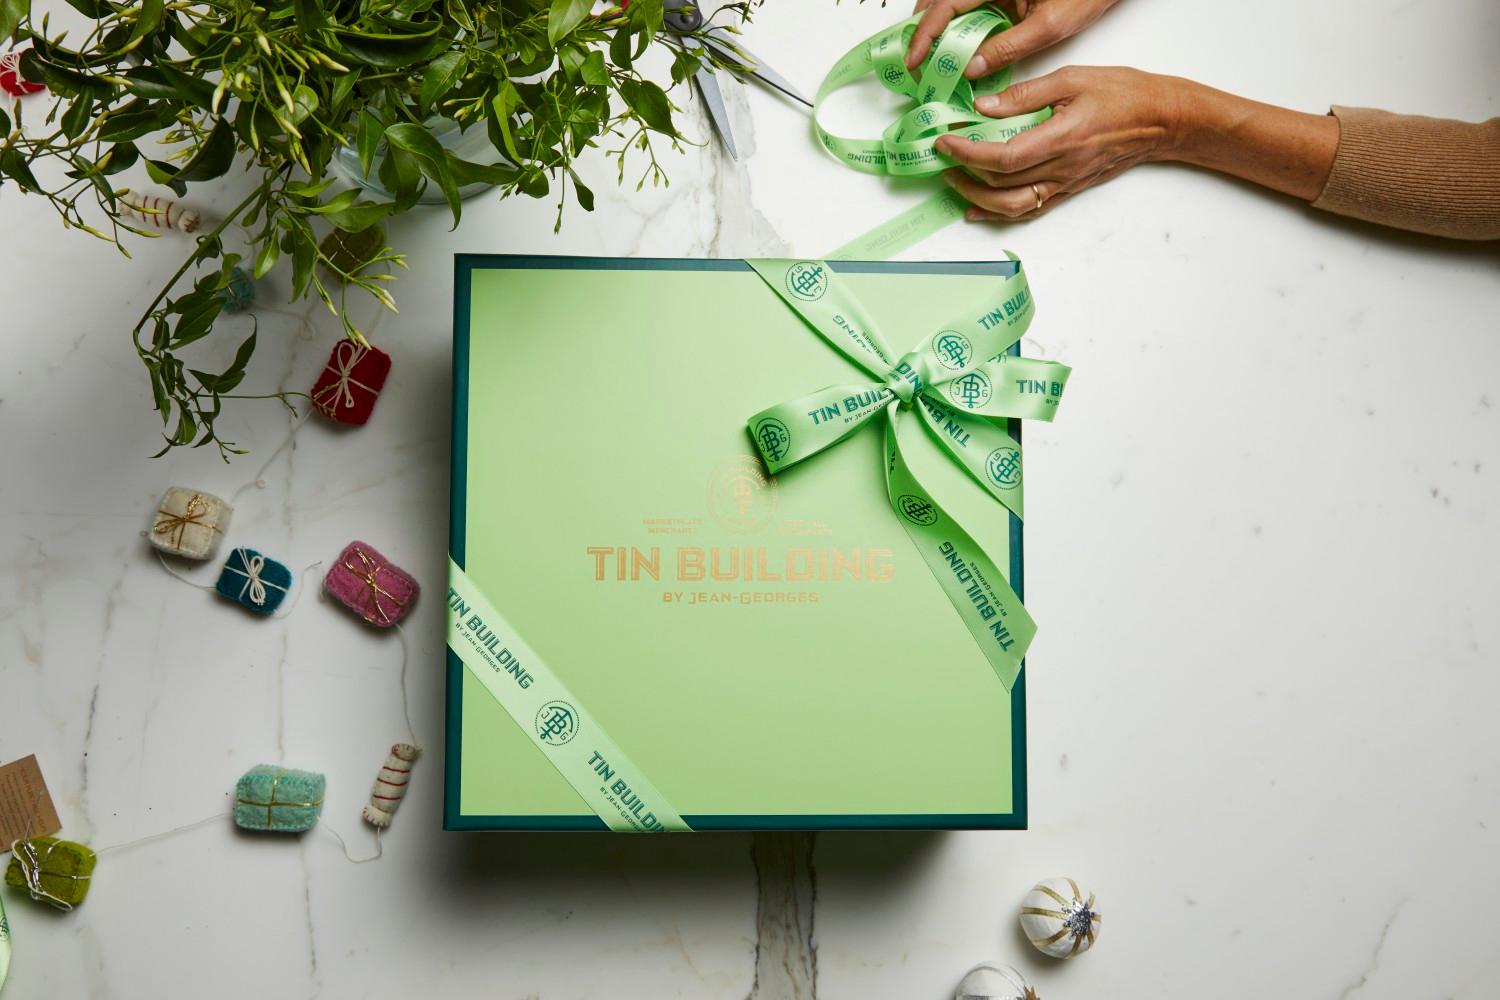 Shop exclusively curated gift boxes by chef Jean-Georges